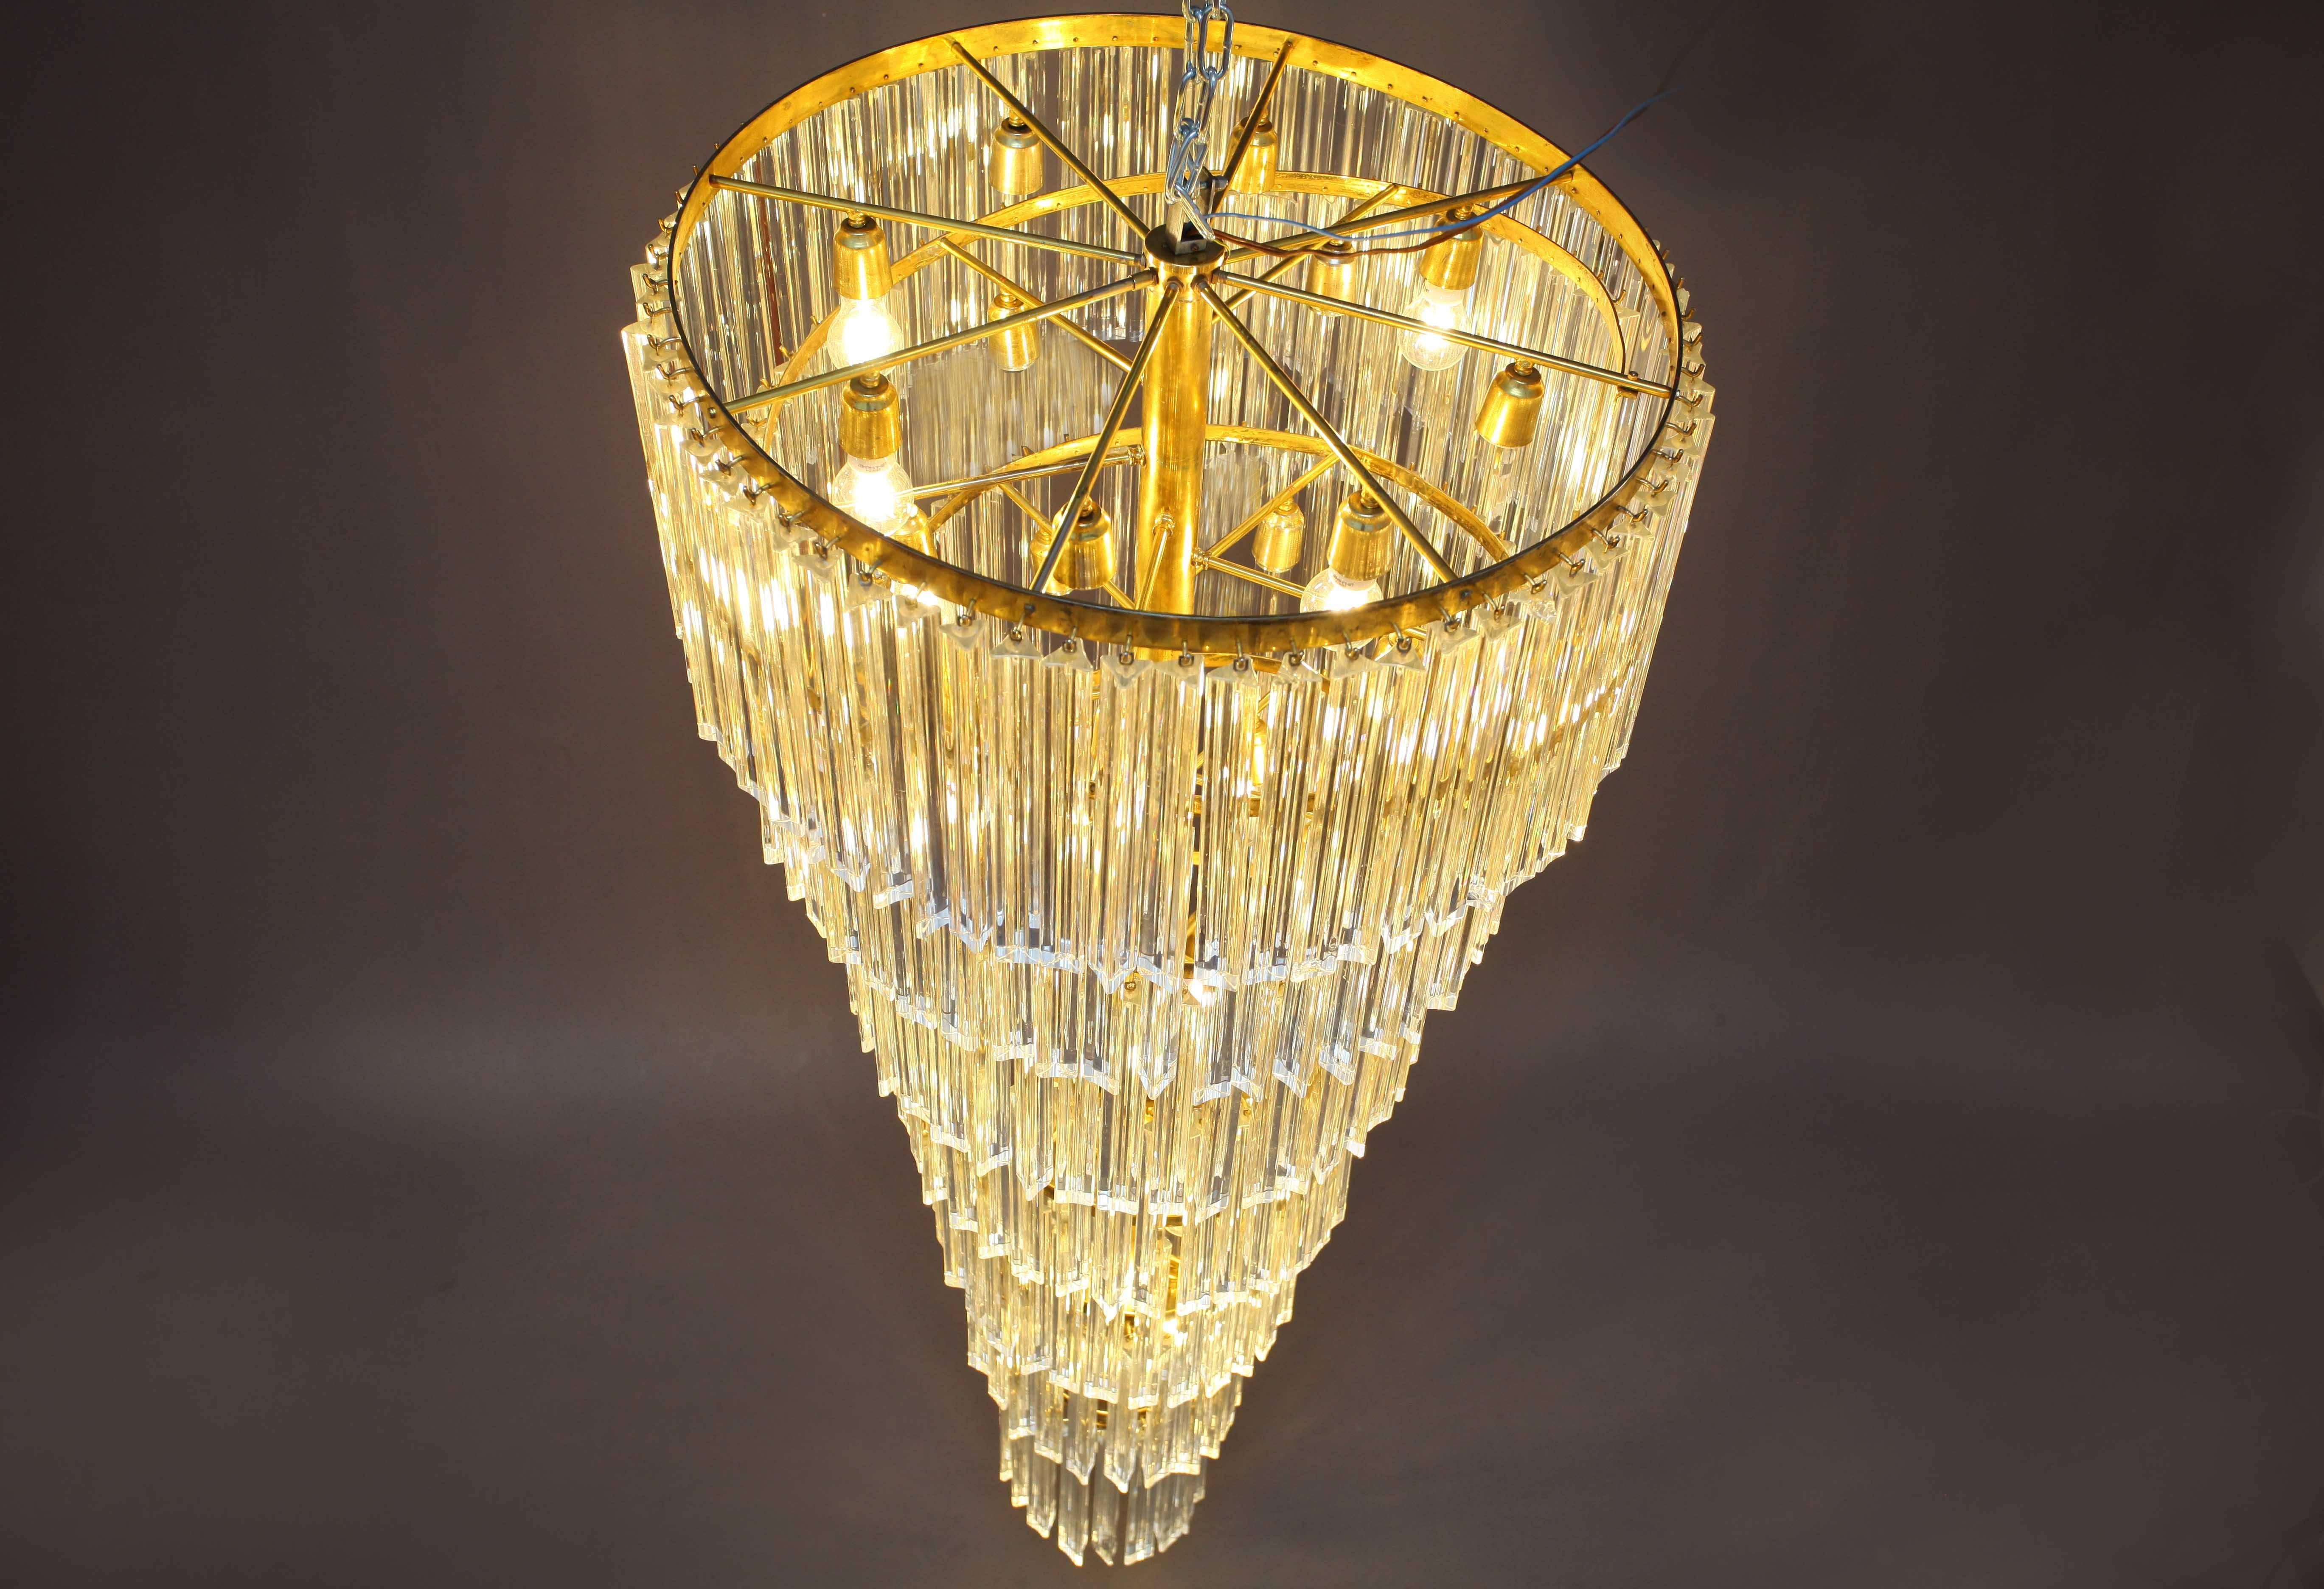 Italian spiral crystal glass chandelier,
manufacturer Venini Murano, circa 1960s.
Each of the prisms are solid glass measuring 11.8 inches each.
They hang from hooks into a spiral brass frame, as pictured.
28 bulb sockets each 60 watt max.
Measures: